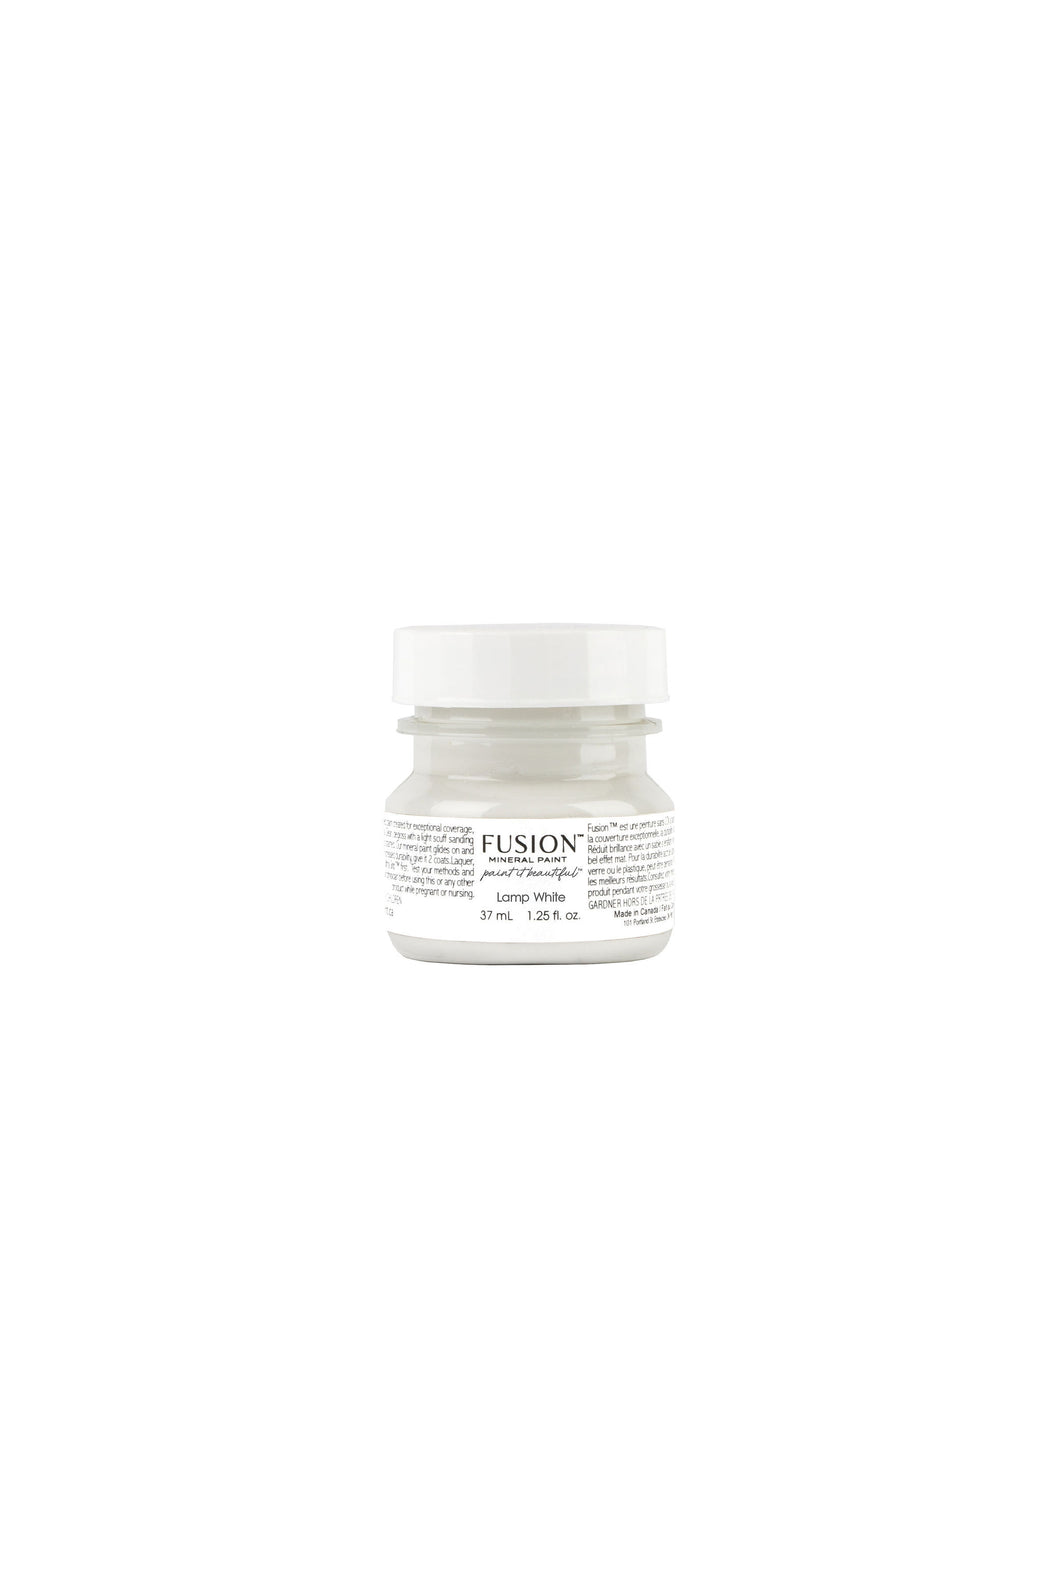 Fusion Mineral Paint - Lamp White 37 ml Jar